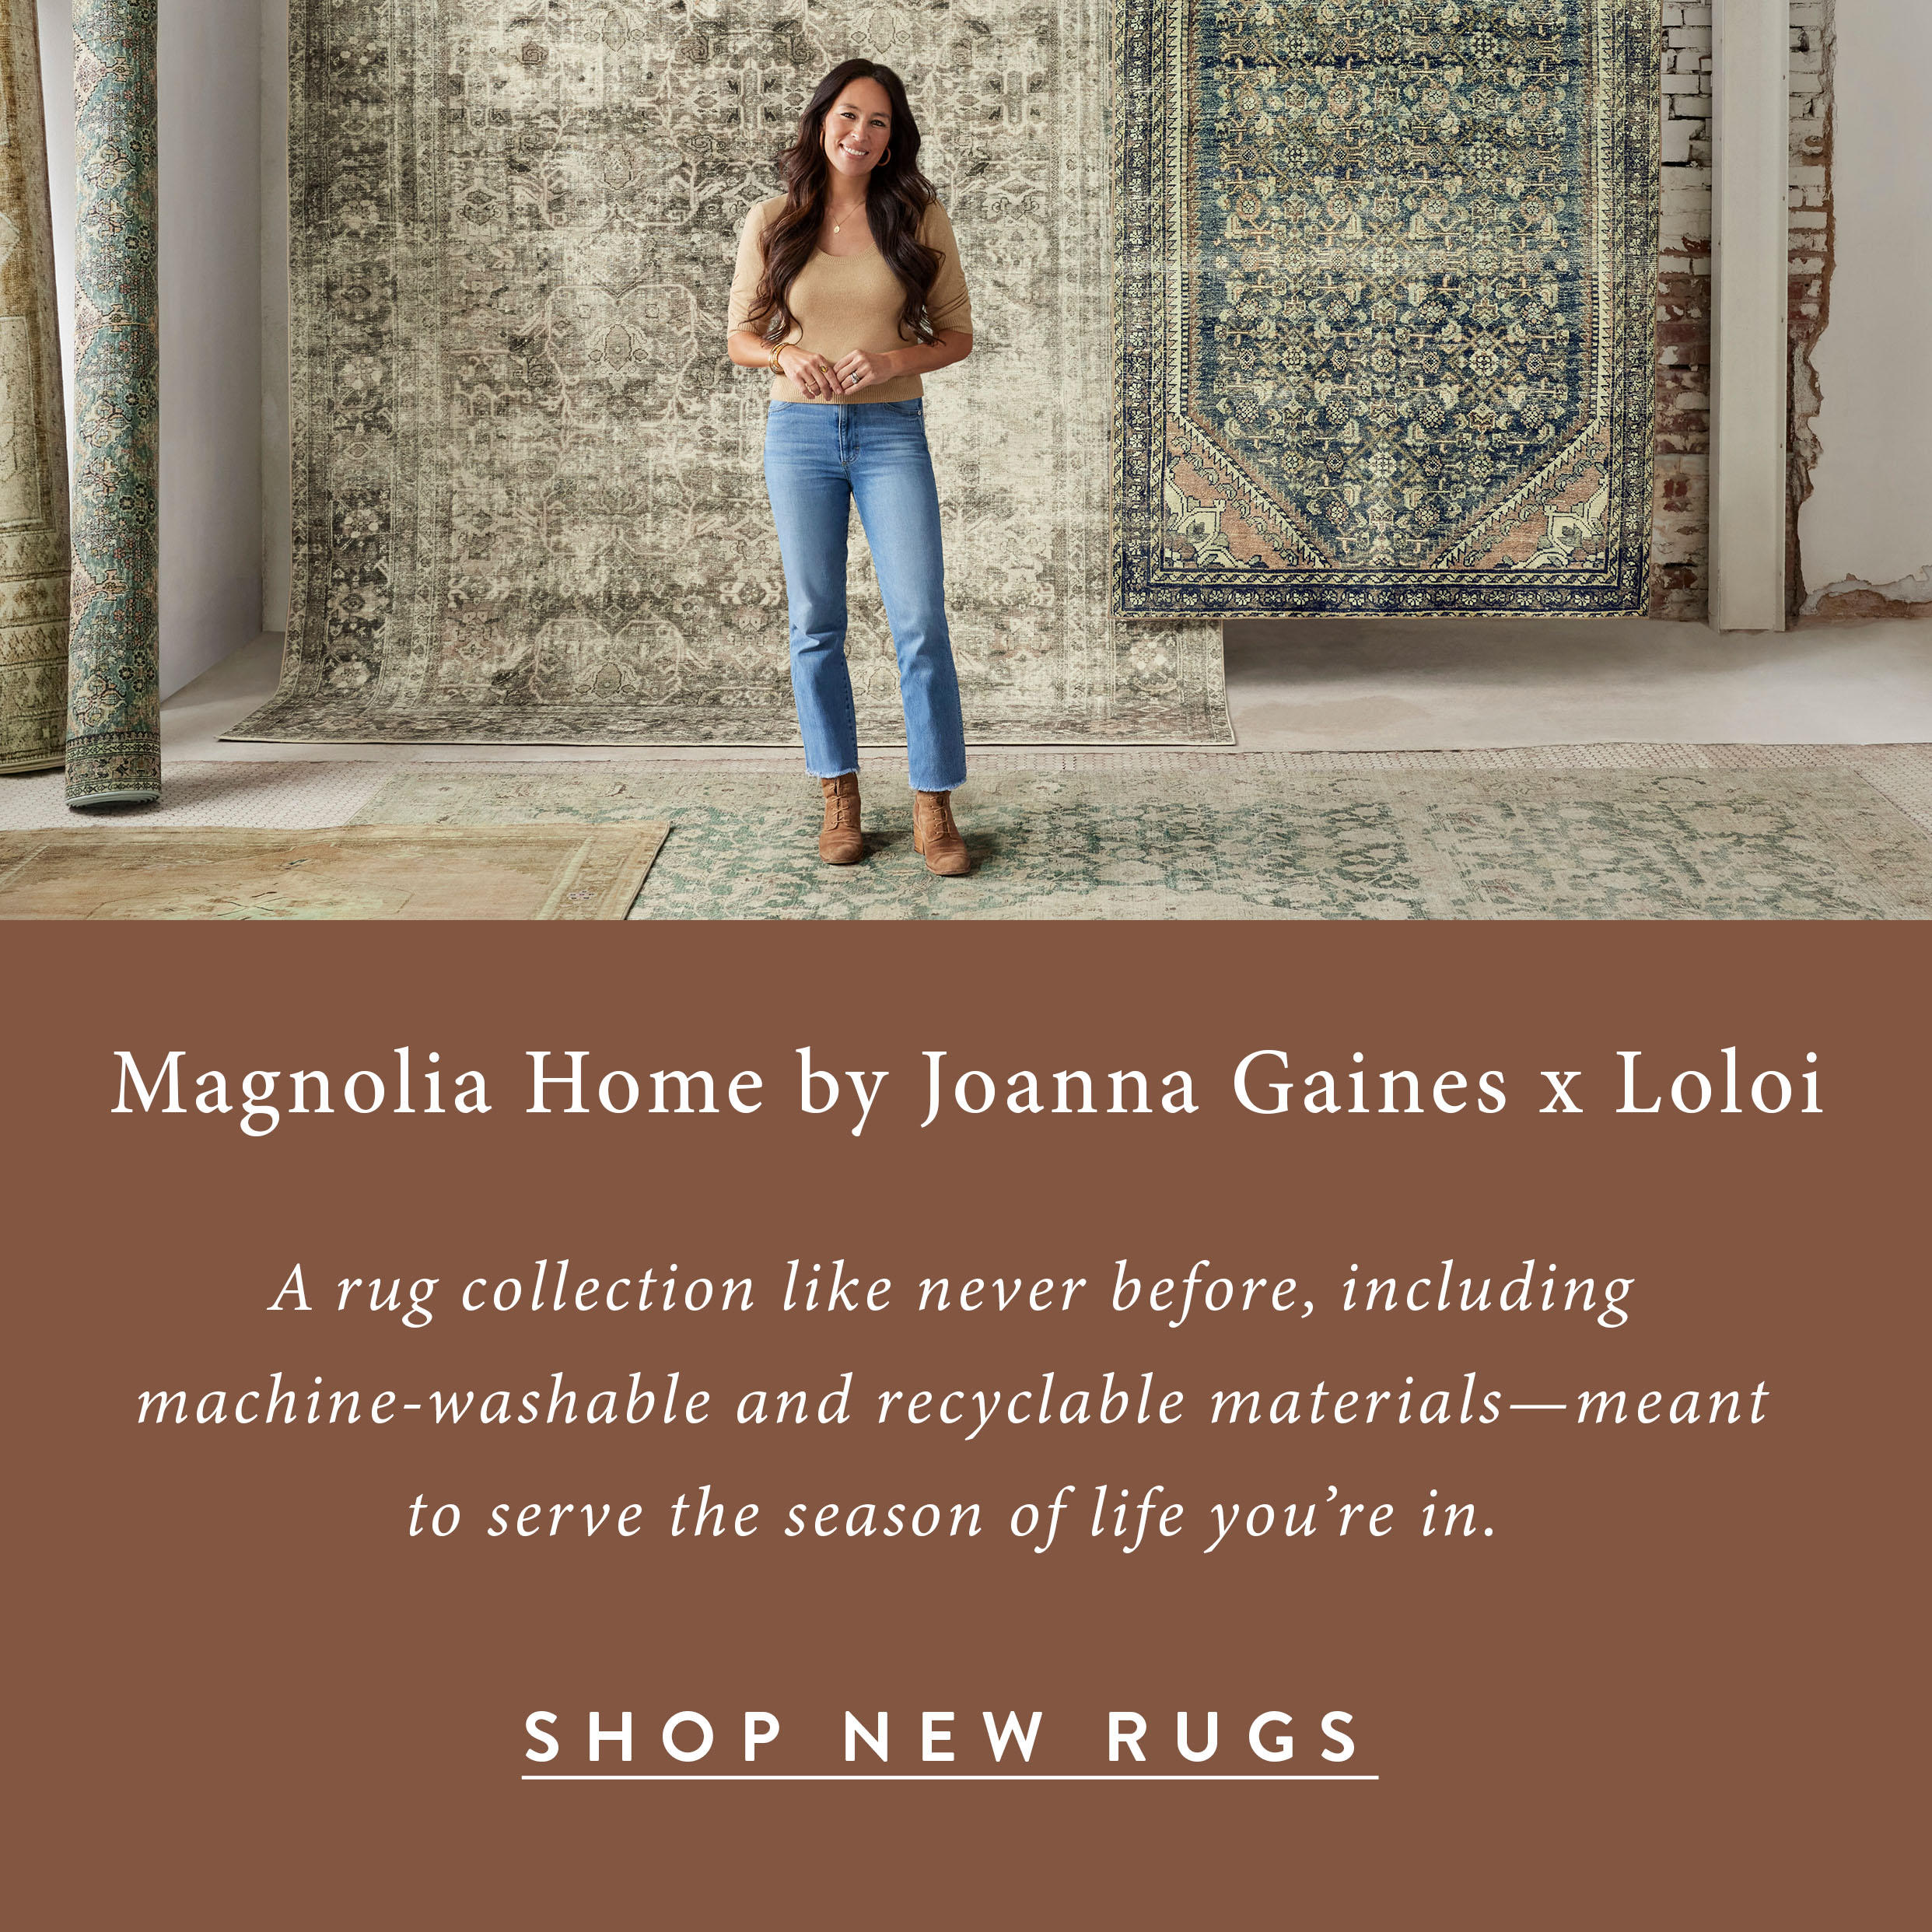 Magnolia Home Rugs by Joanna Gaines x Loloi. Joanna gaines stands in front of rugs hanging on walls